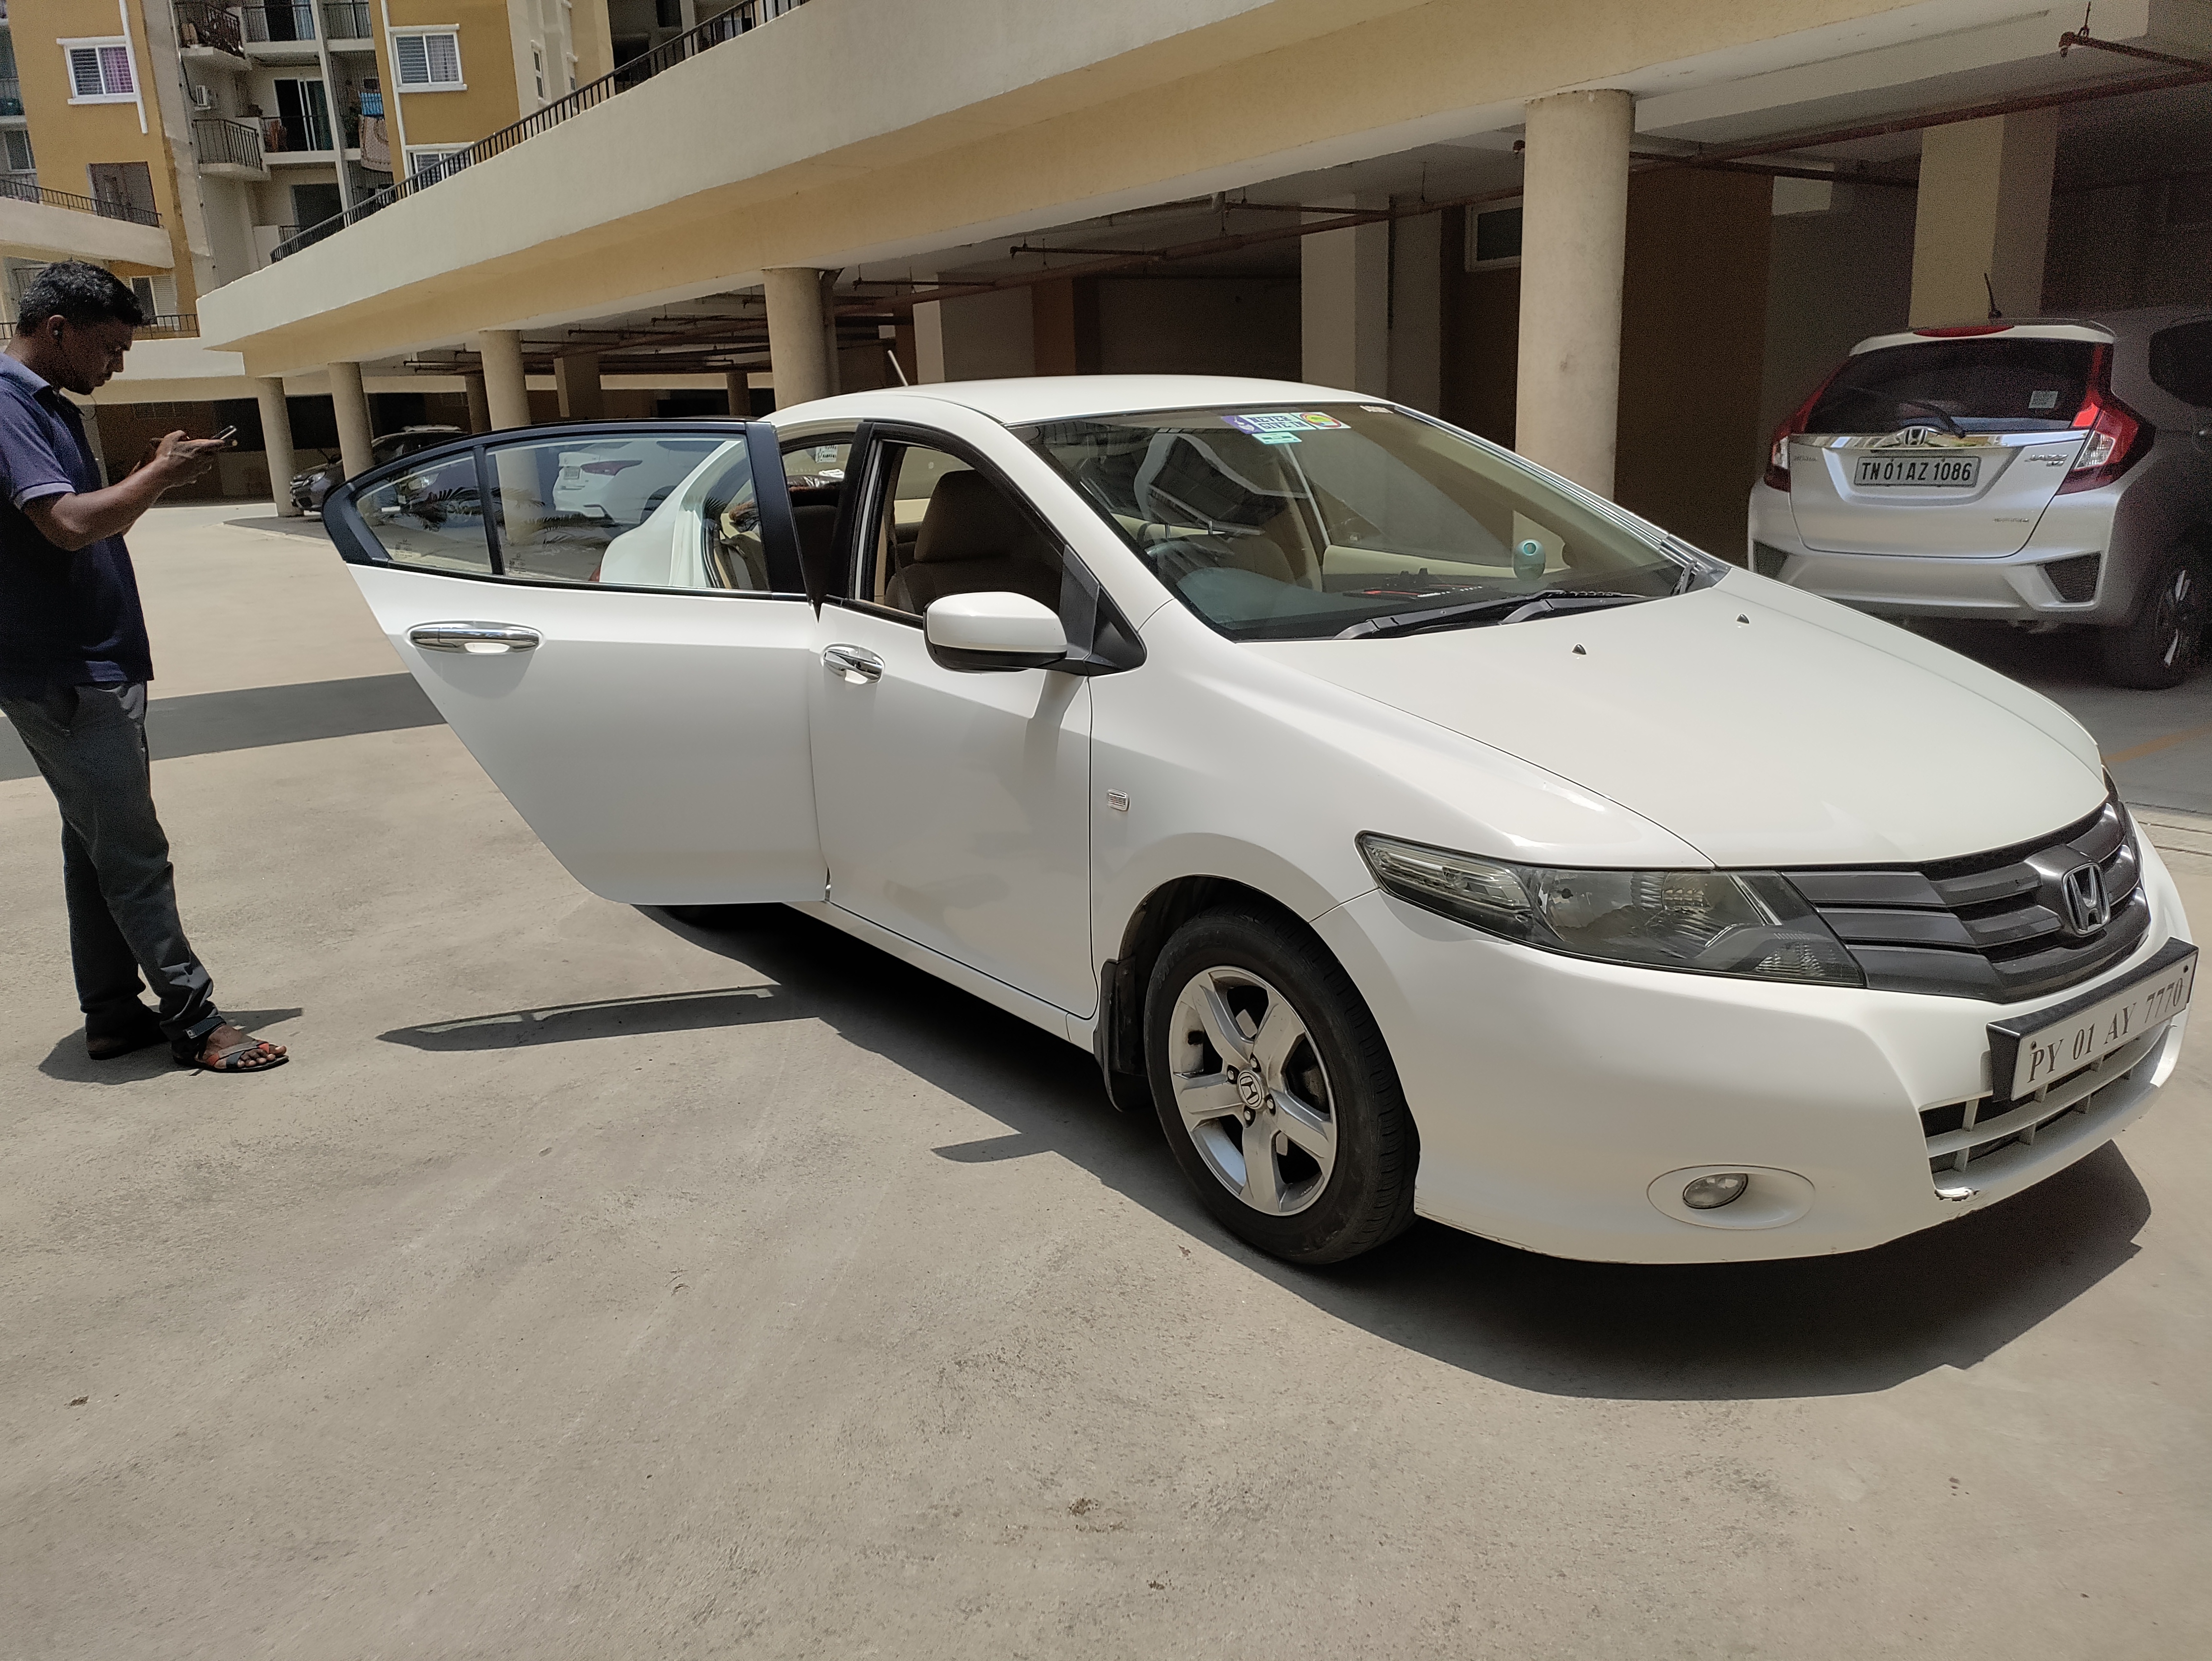 6807-for-sale-Honda-City-Petrol-First-Owner-2009-PY-registered-rs-410000